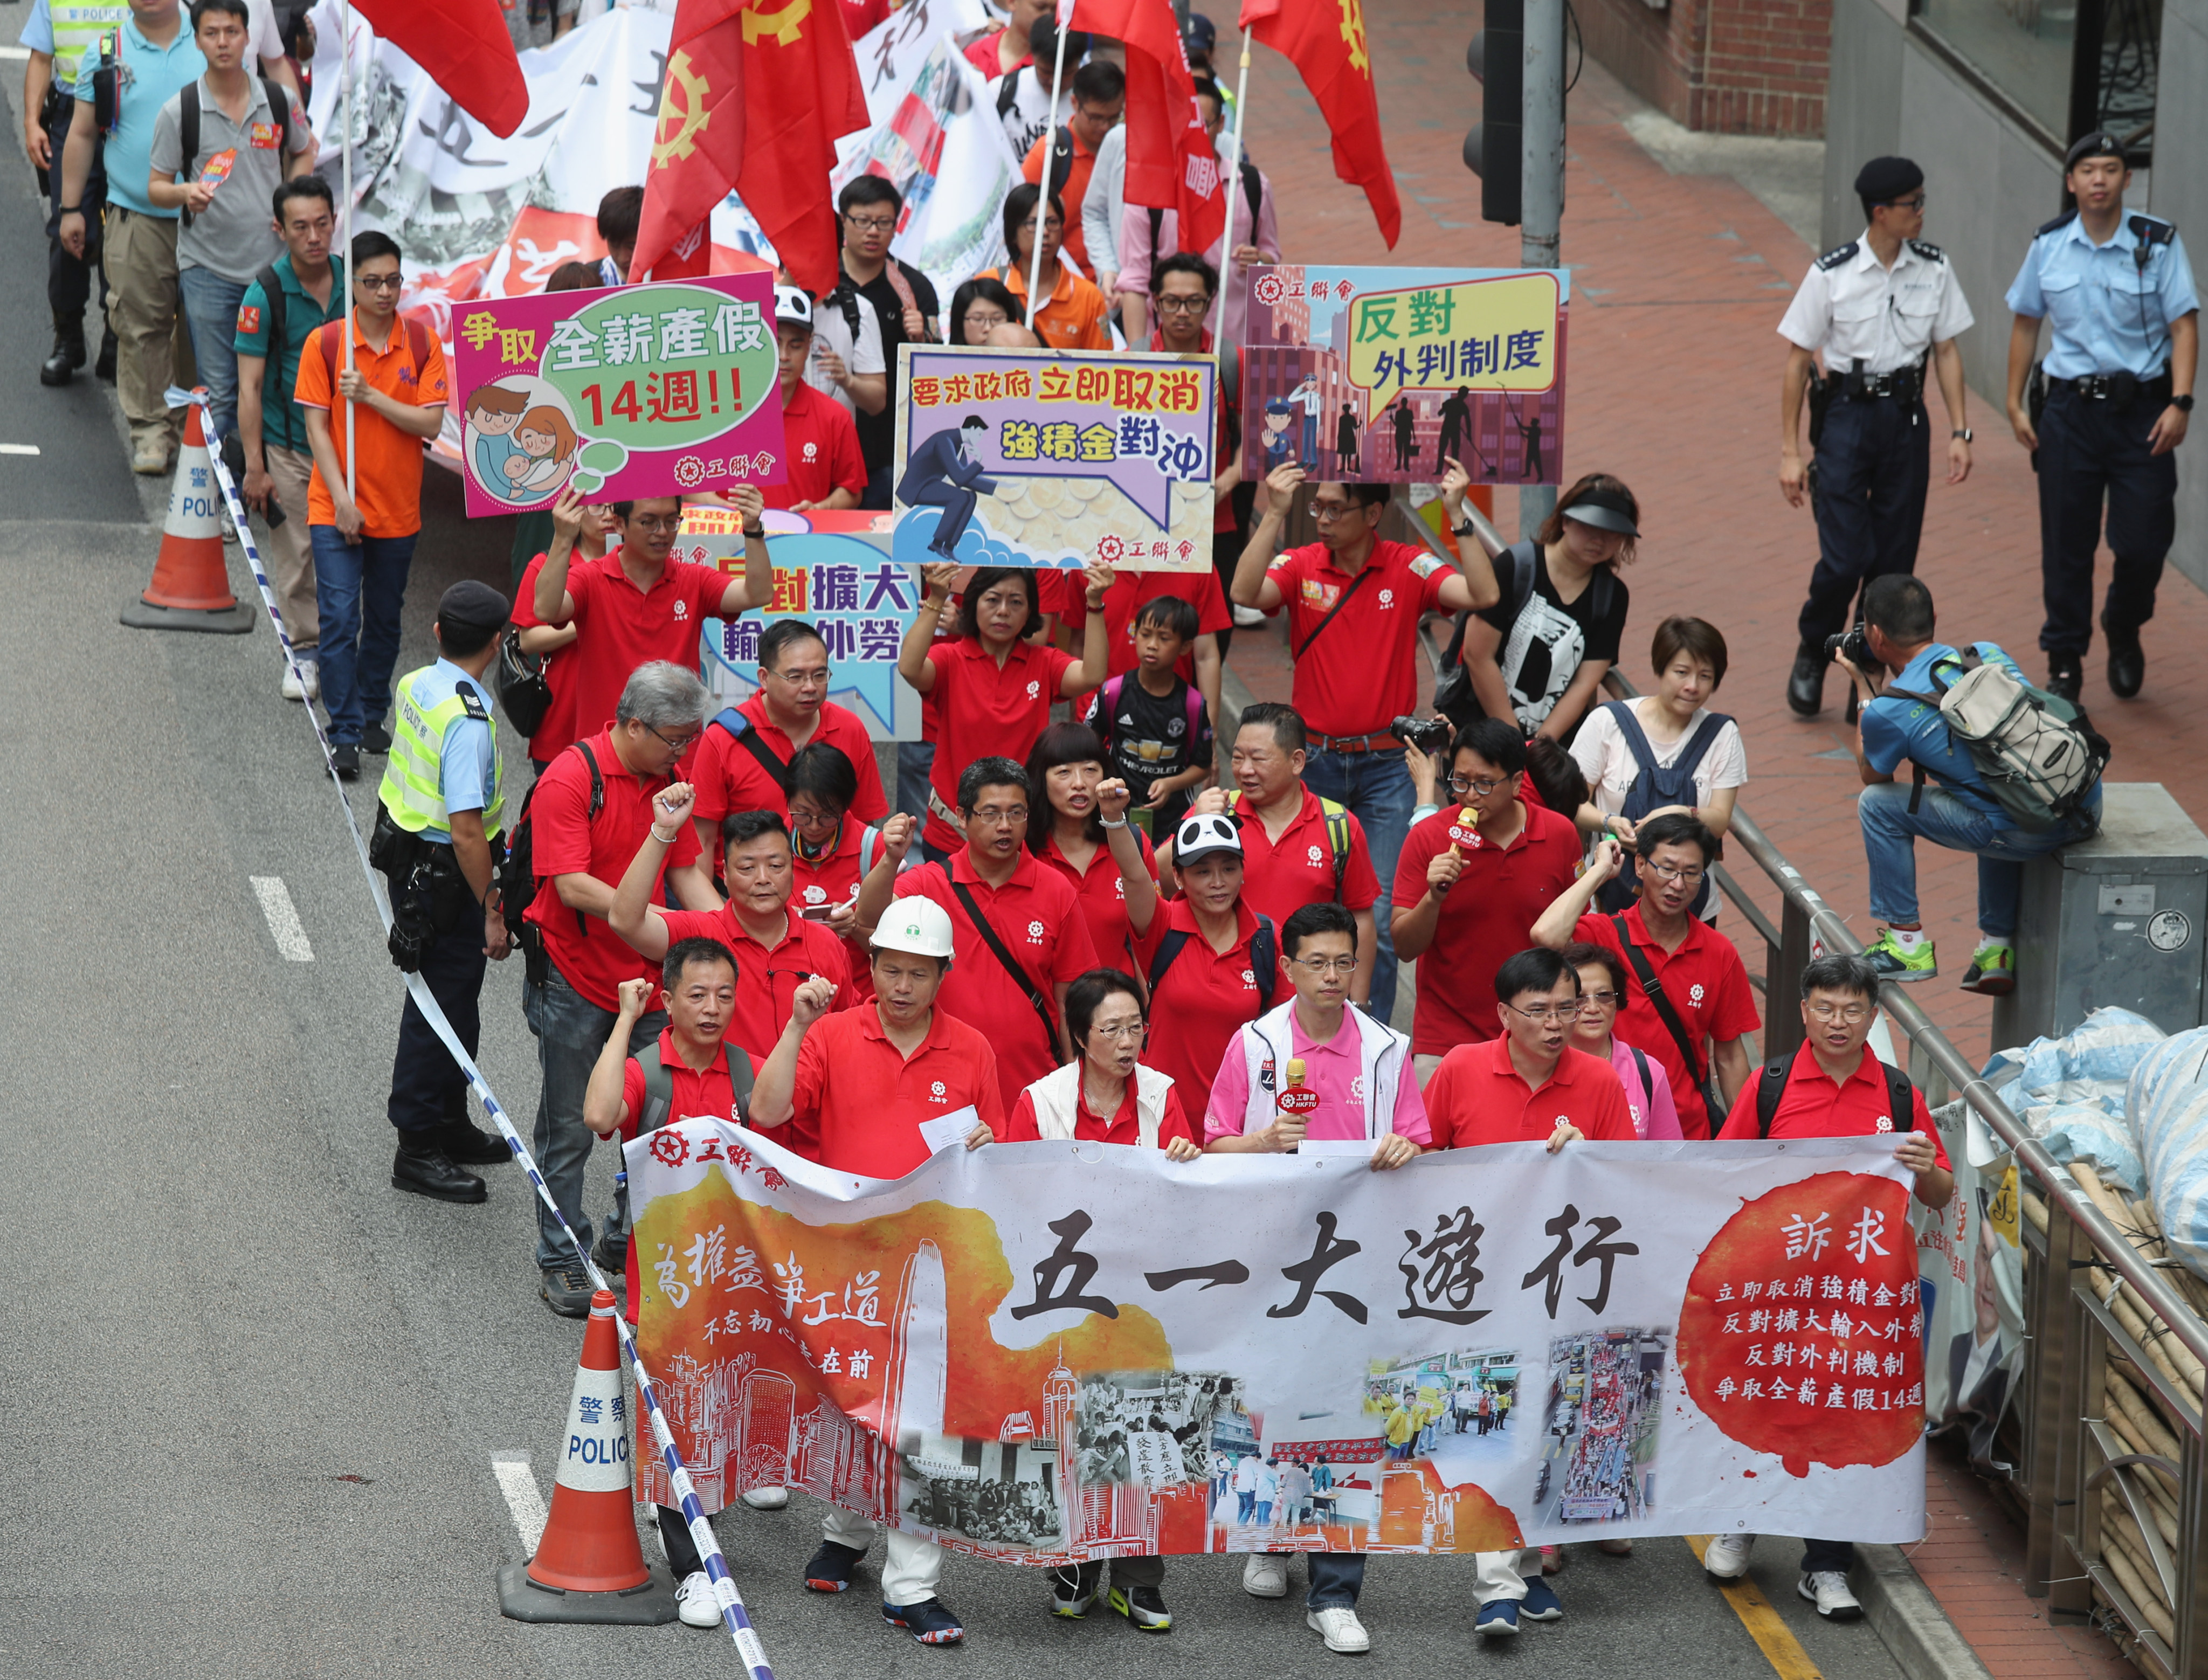 The Hong Kong Federation of Trade Unions’ Labour Day rally in 2018. Photo: K. Y. Cheng